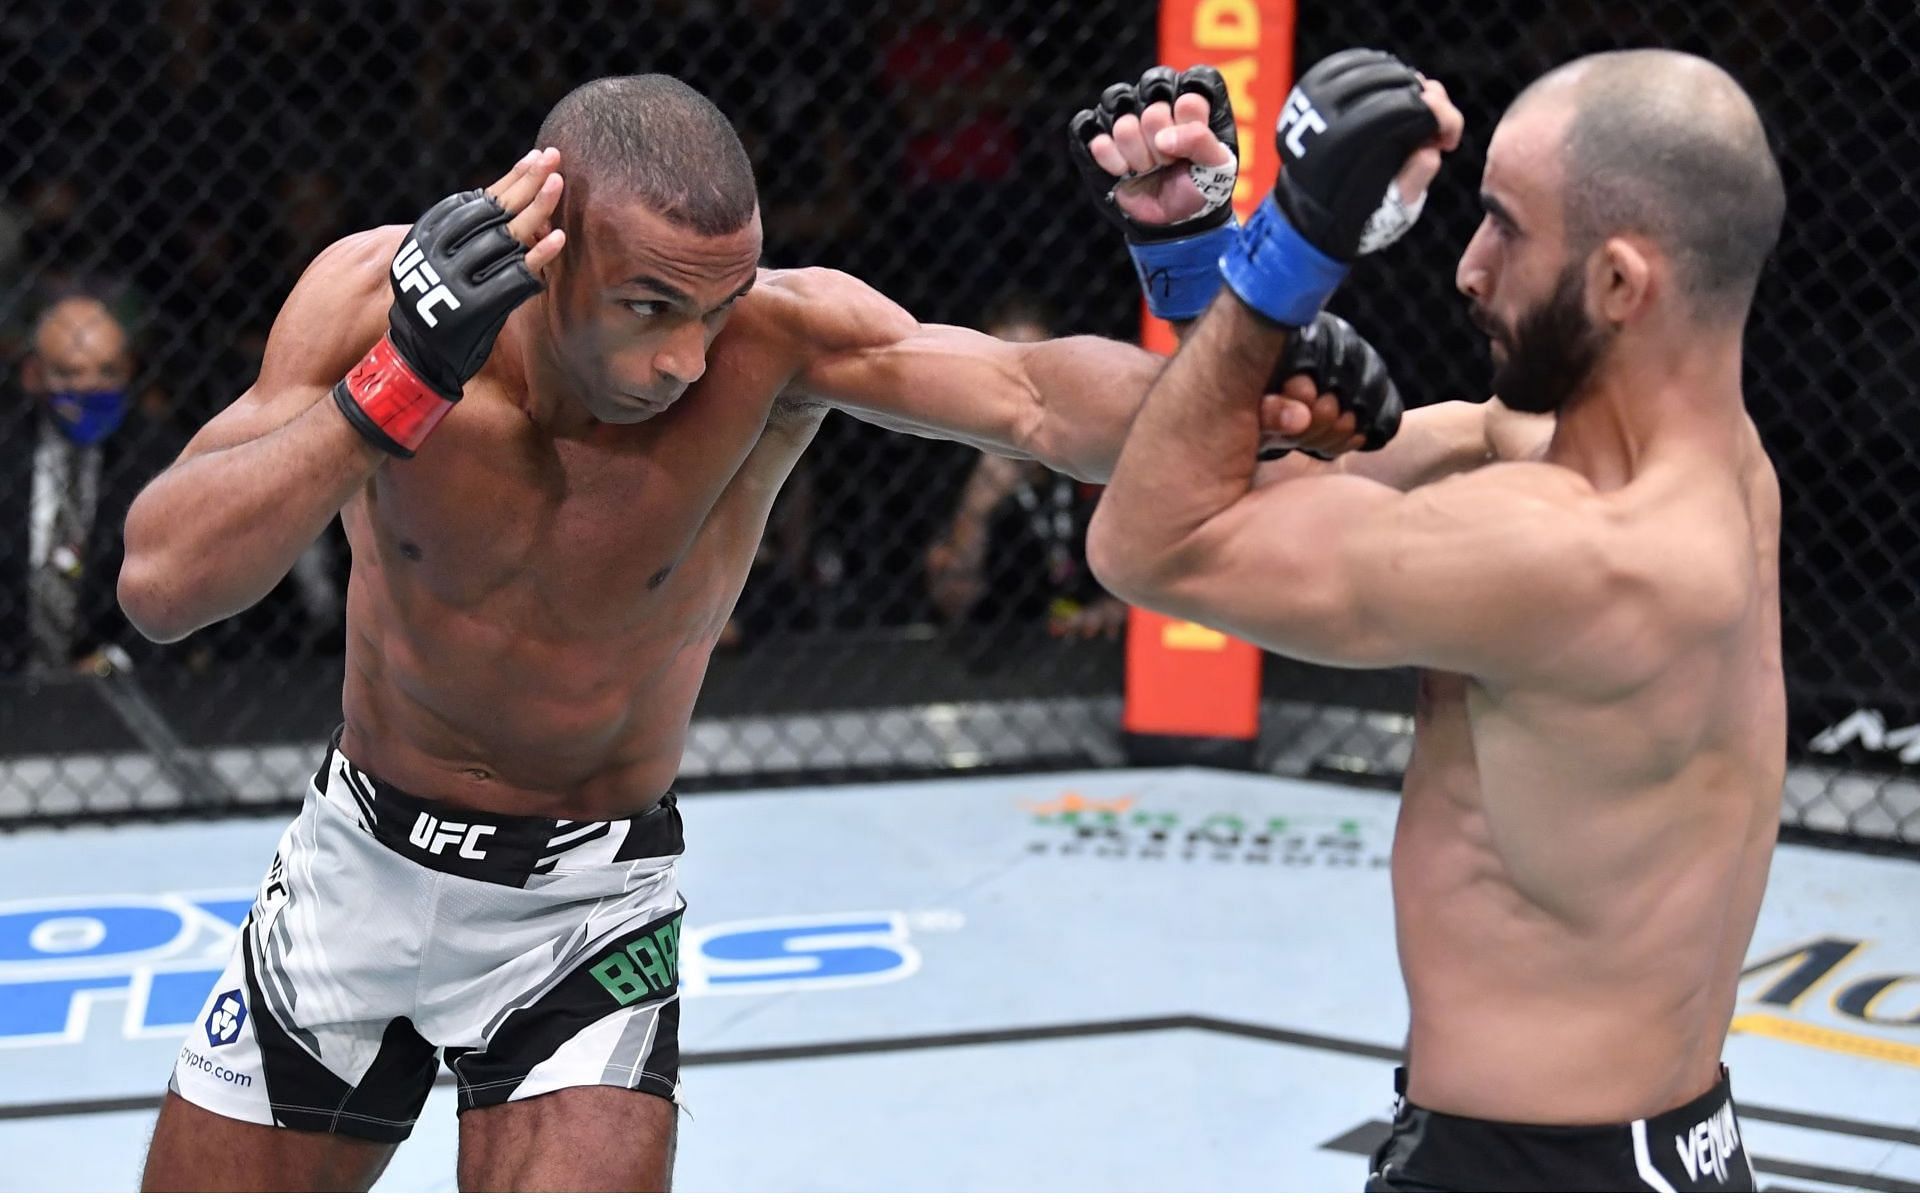 Edson Barboza earned praise for his physique last weekend [Image Credit: Getty]